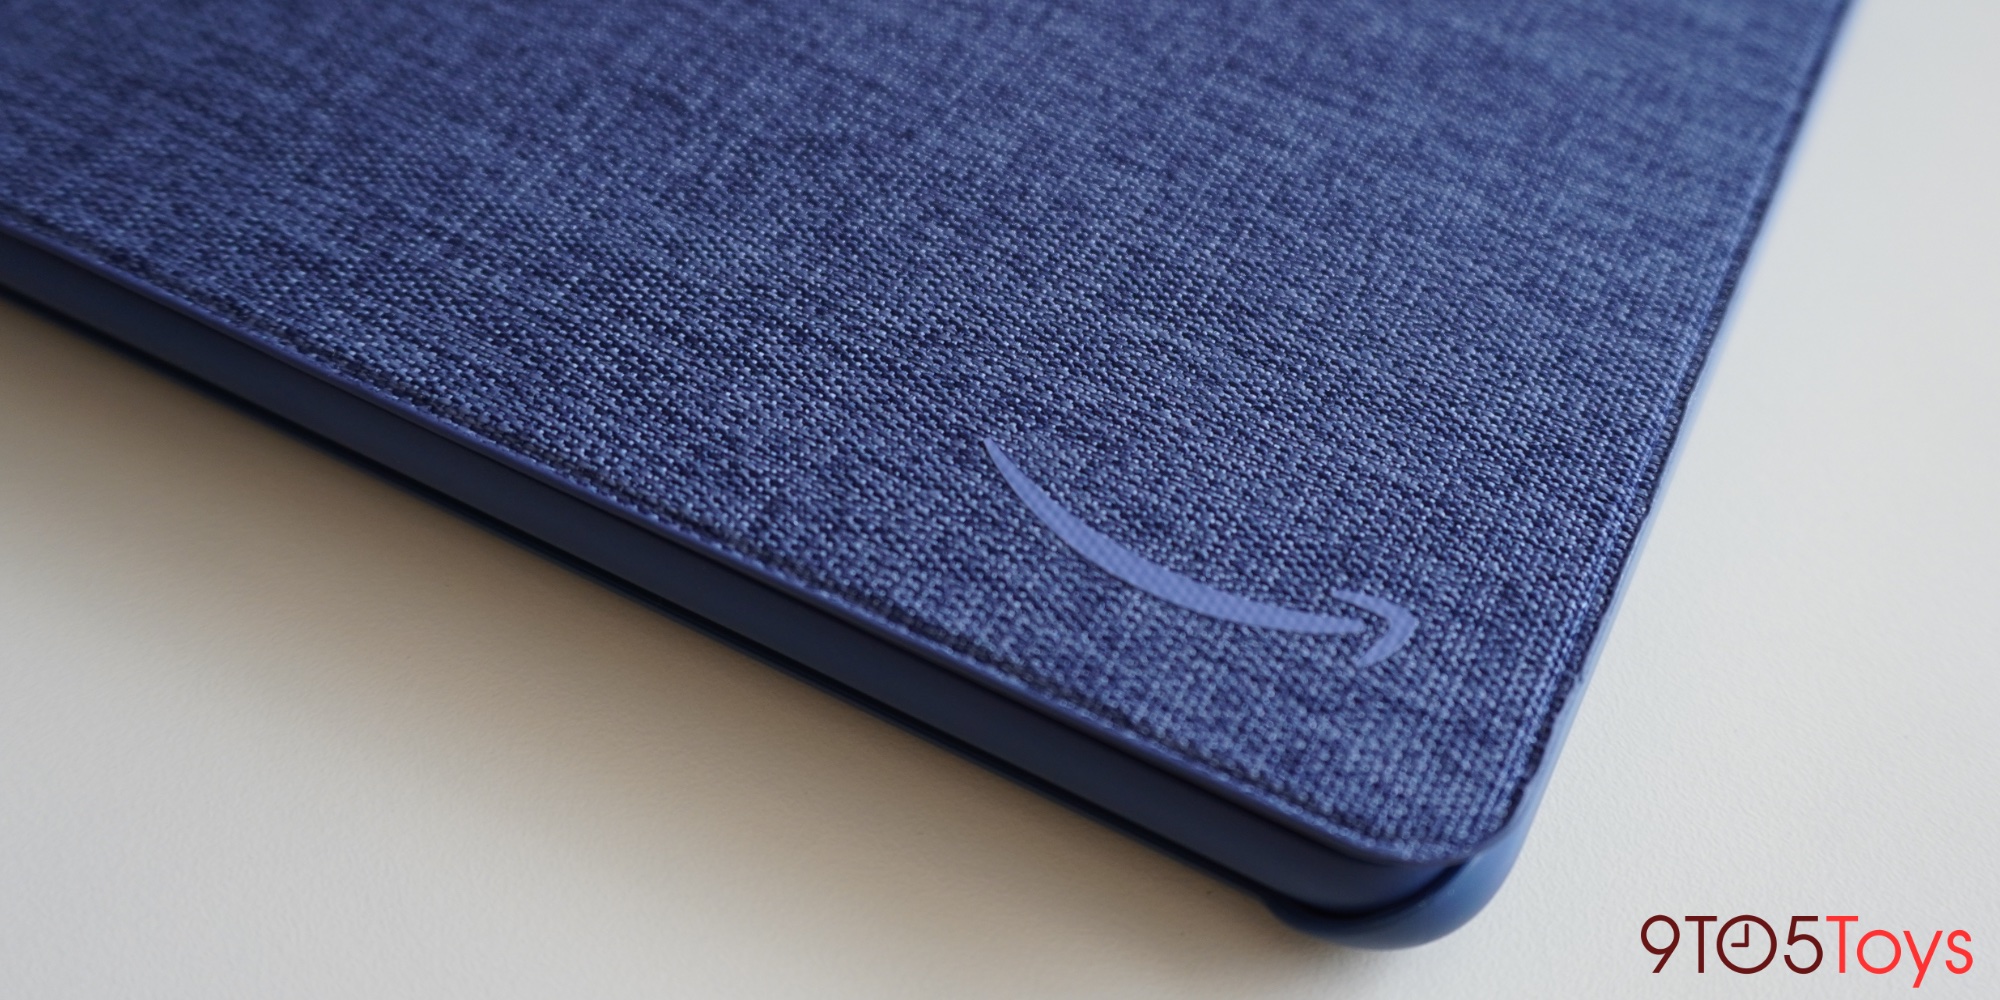 Amazon Fire HD 10 review Productivity delivered? 9to5Toys